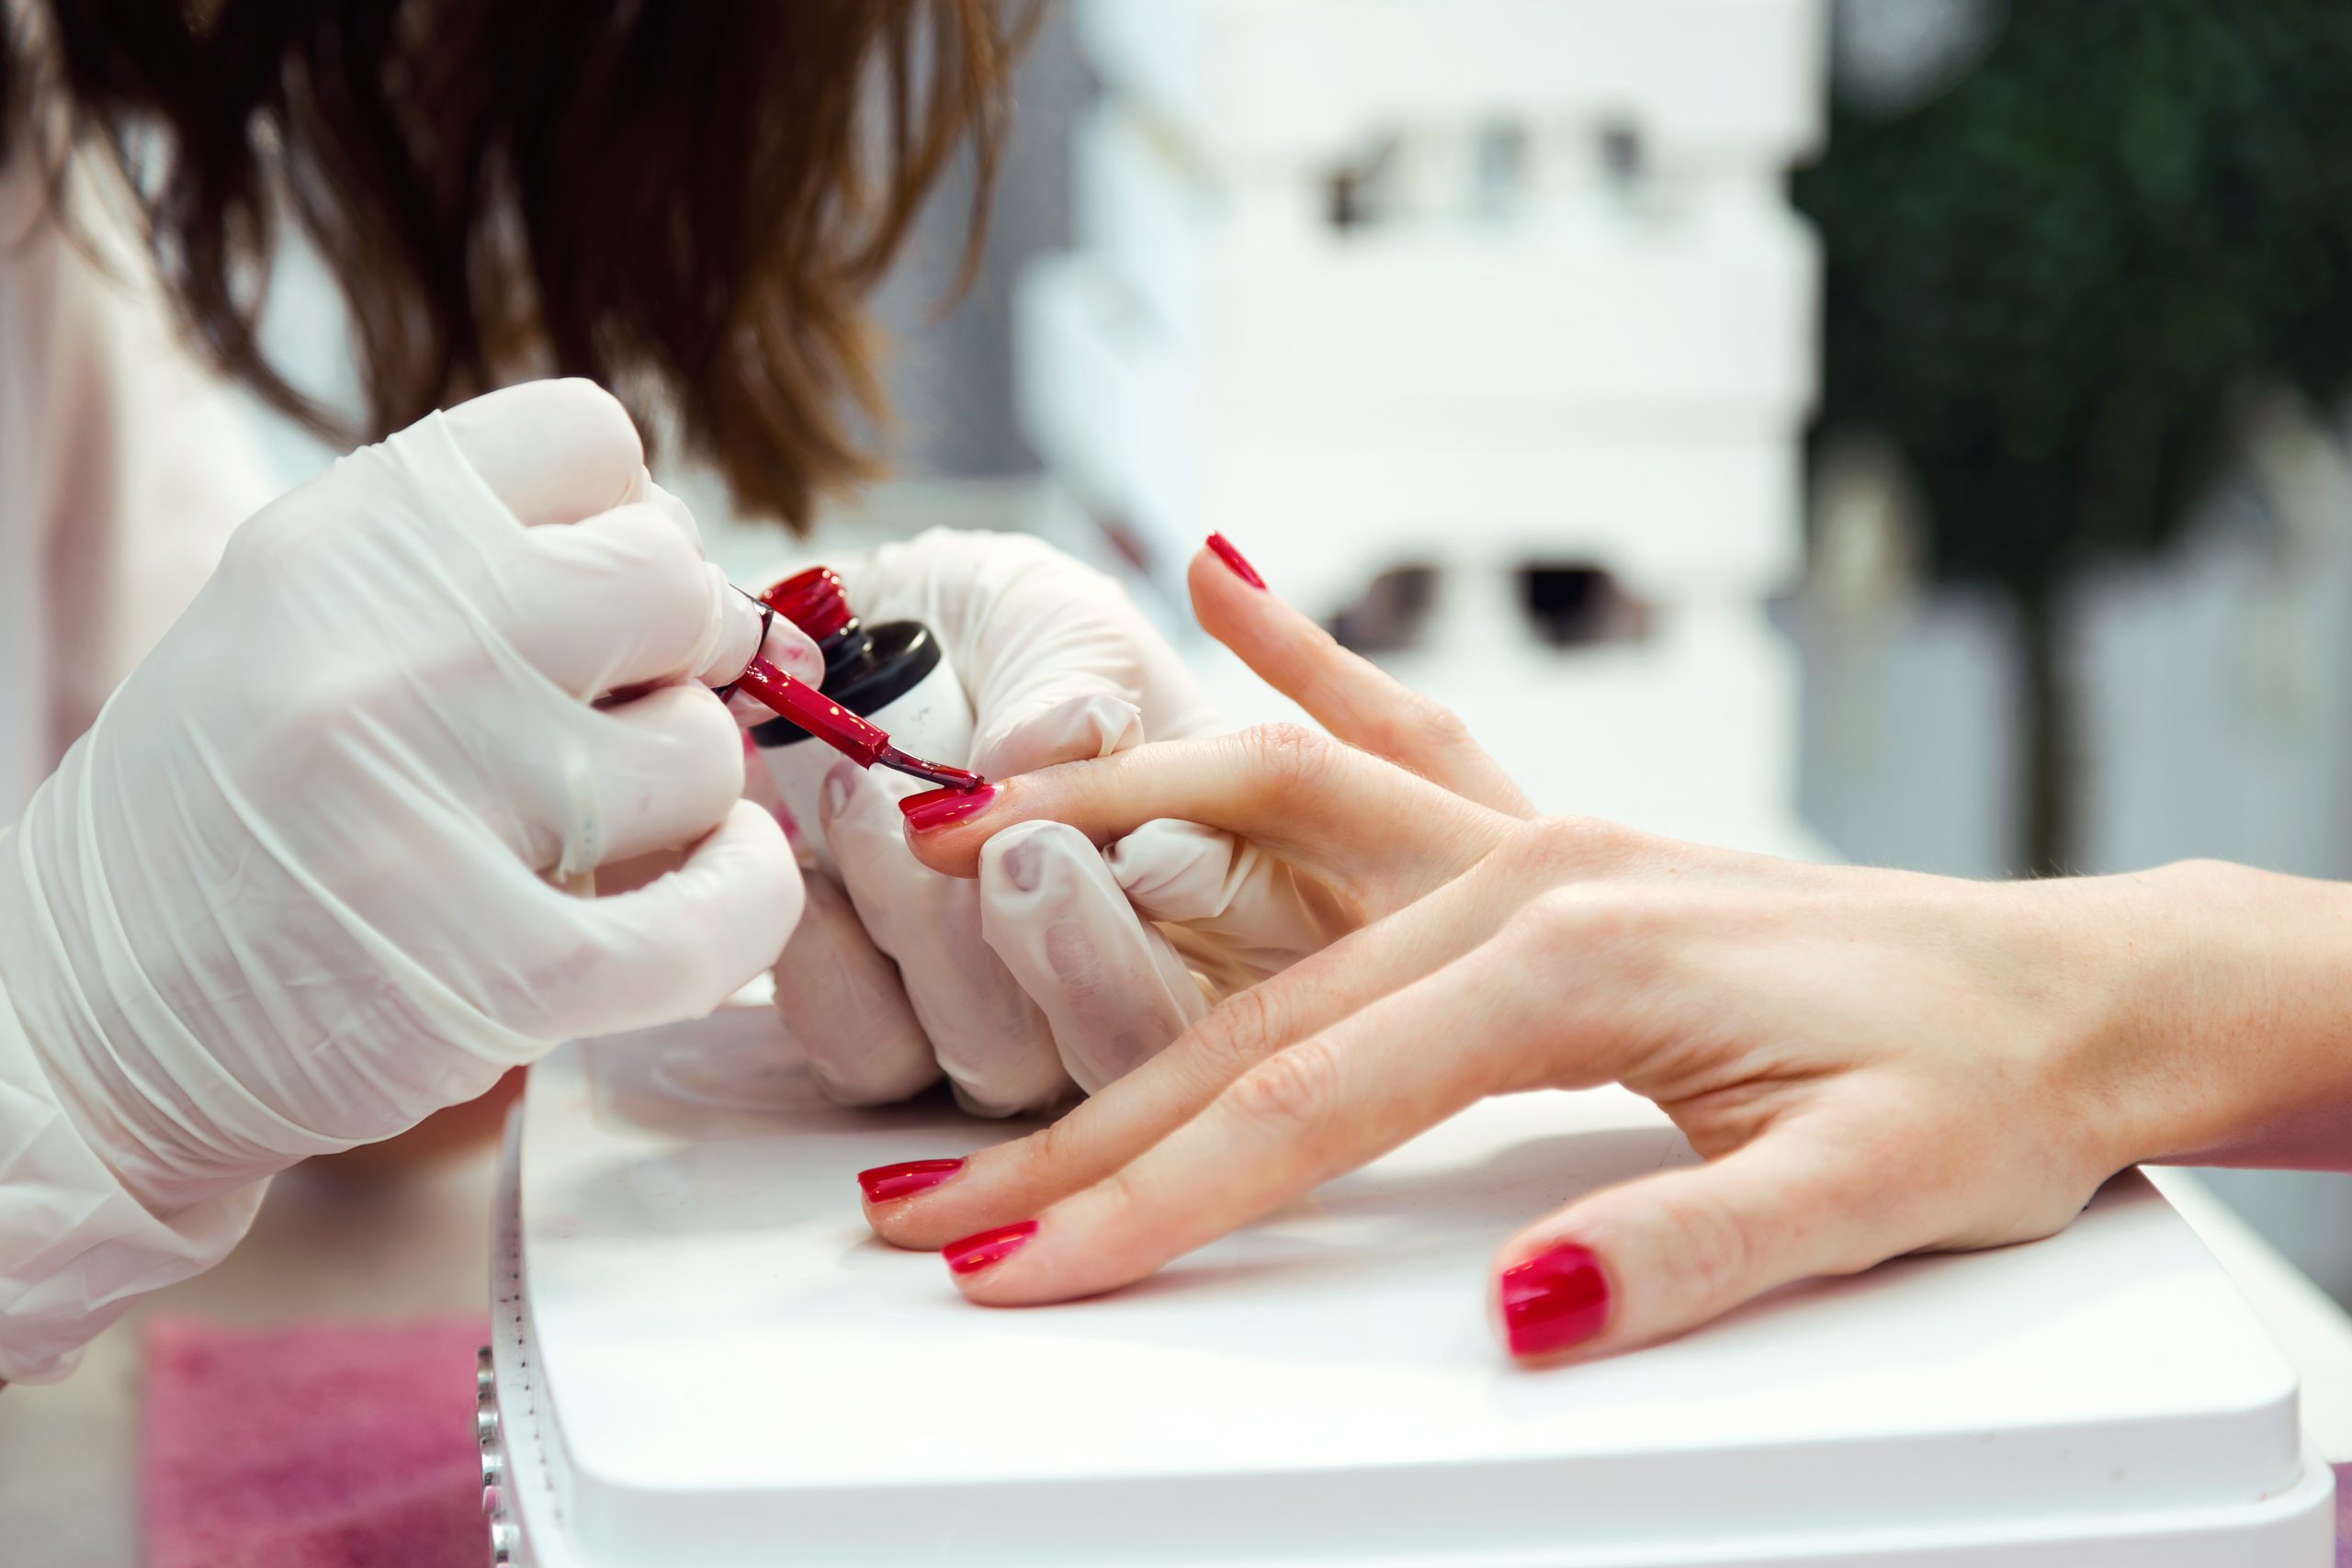 How To Tell If Your Nail Salon Is Clean | Footfiles